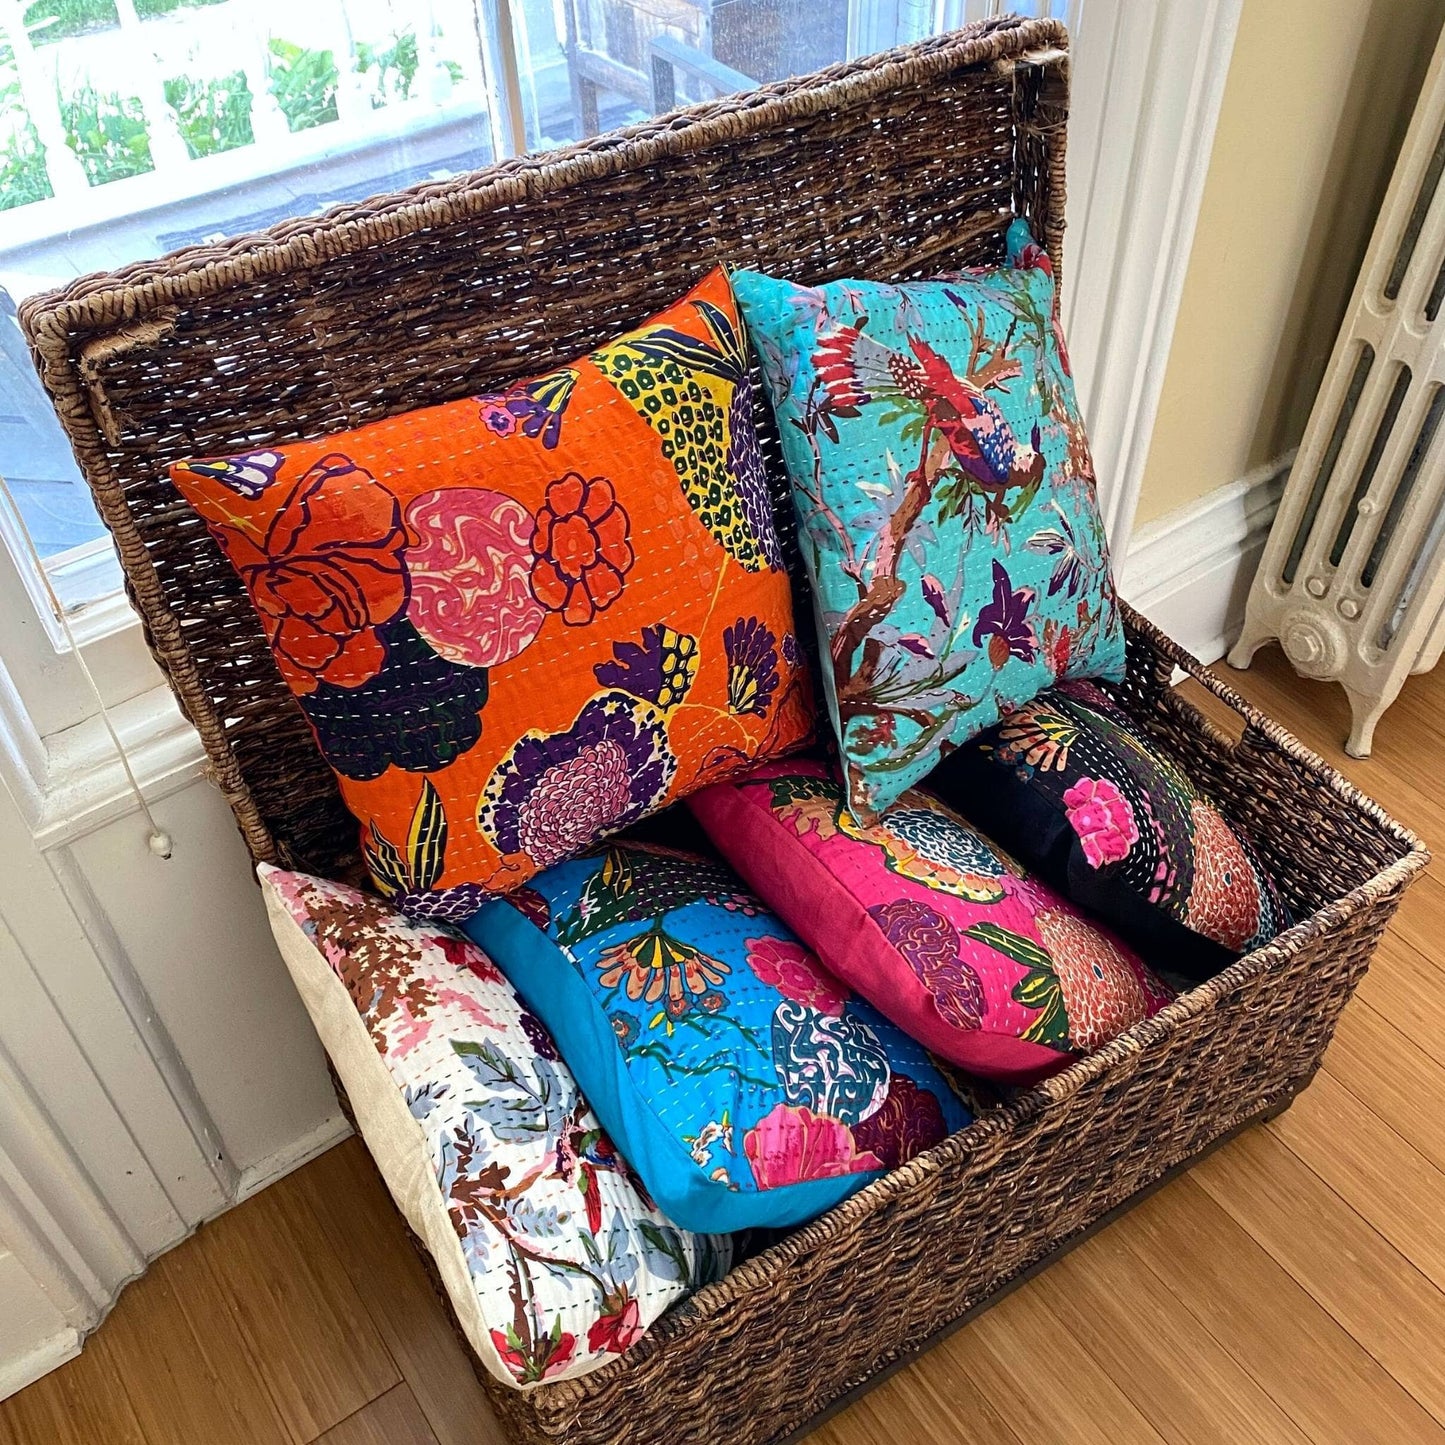 A stack of kantha pillow colors in a rectangular basket sitting in front of a window on a wooden floor.